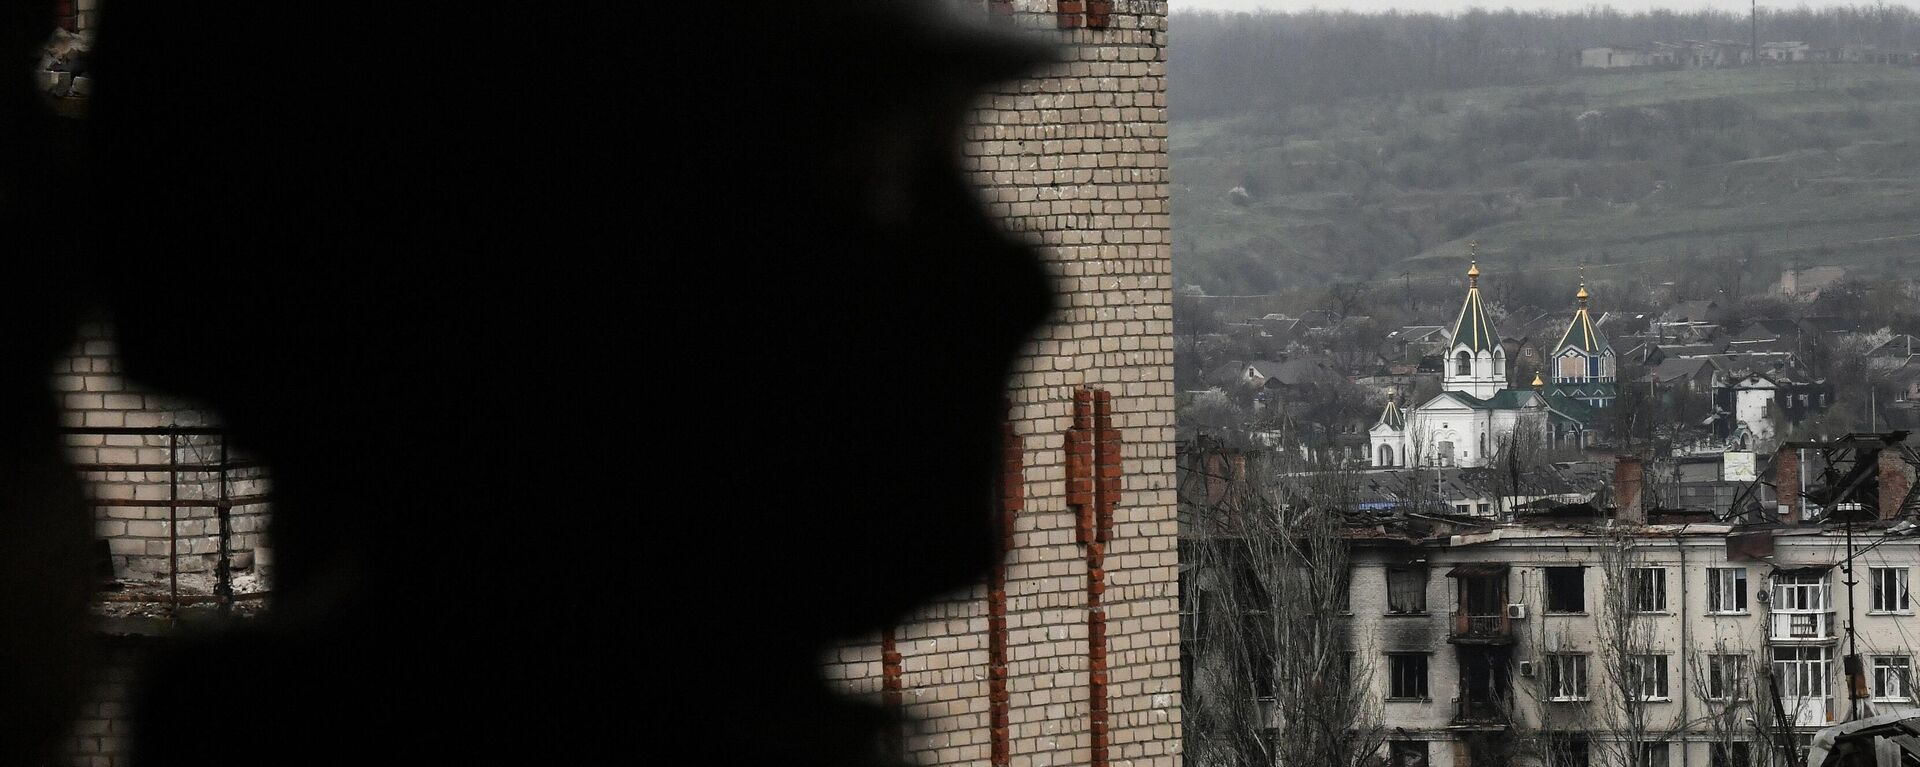 A service member of Russia's private military company Wagner Group inspects a building in Artemovsk, also known as Bakhmut, as Russia's military operation in Ukraine continues, Donetsk People's Republic, Russia. - Sputnik Africa, 1920, 21.05.2023